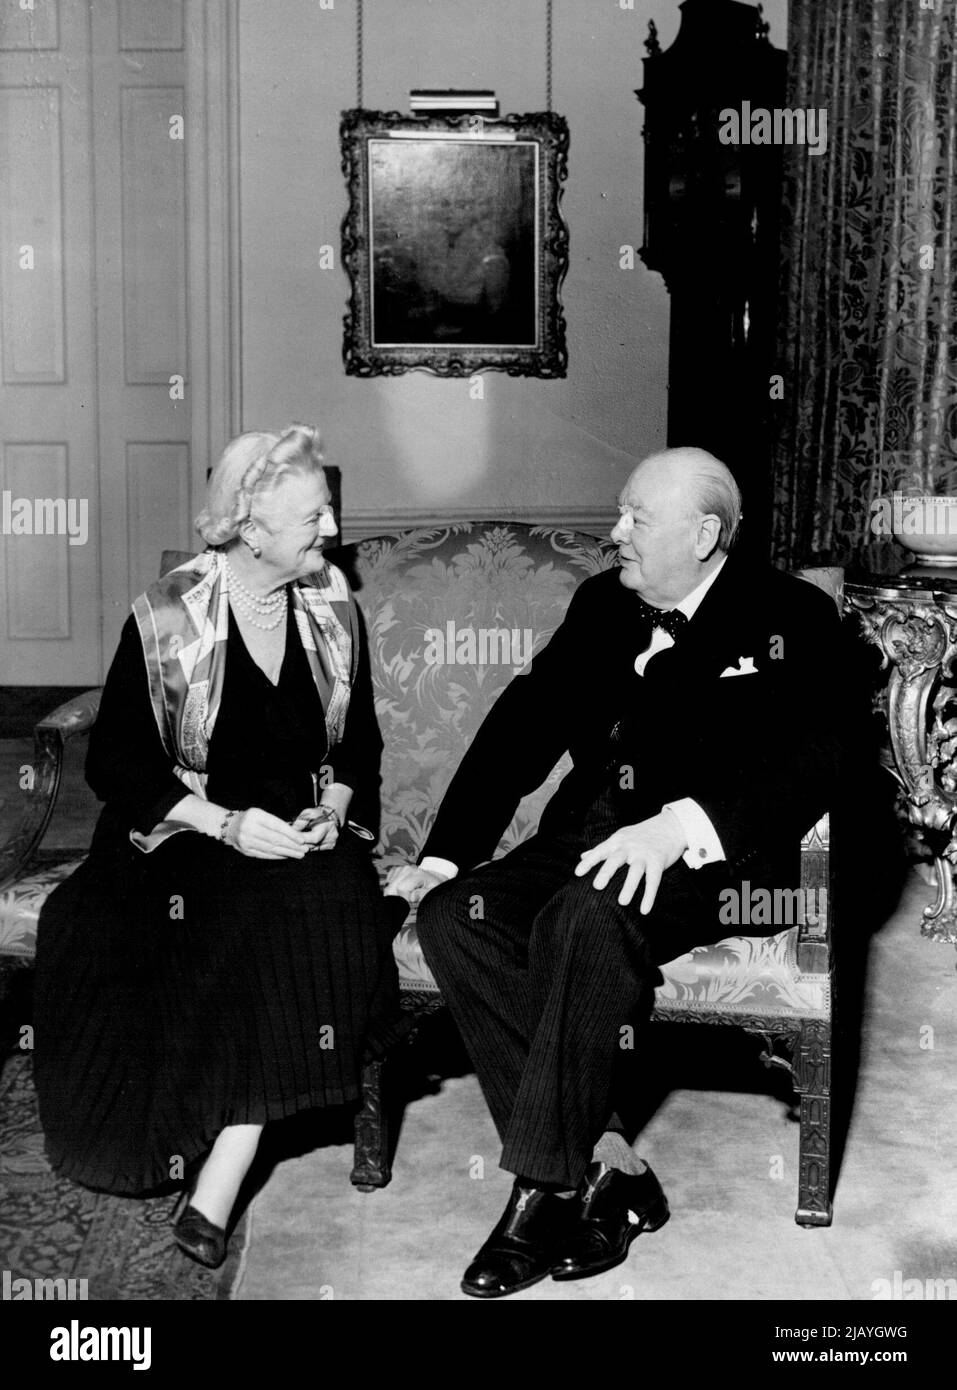 Mr. Churchill's Birthday: The Rt. Hon. Winston Churchill, the Prime Minister and Minister of Defence, who celebrates his 77th Birthday tomorrow (Friday) (He was born 30th November, 1874) photographed with Mrs. Churchill at 10 Downing Street, (London) this afternoon (Thursday). November 29, 1951. (Photo by P.N.A). Stock Photo